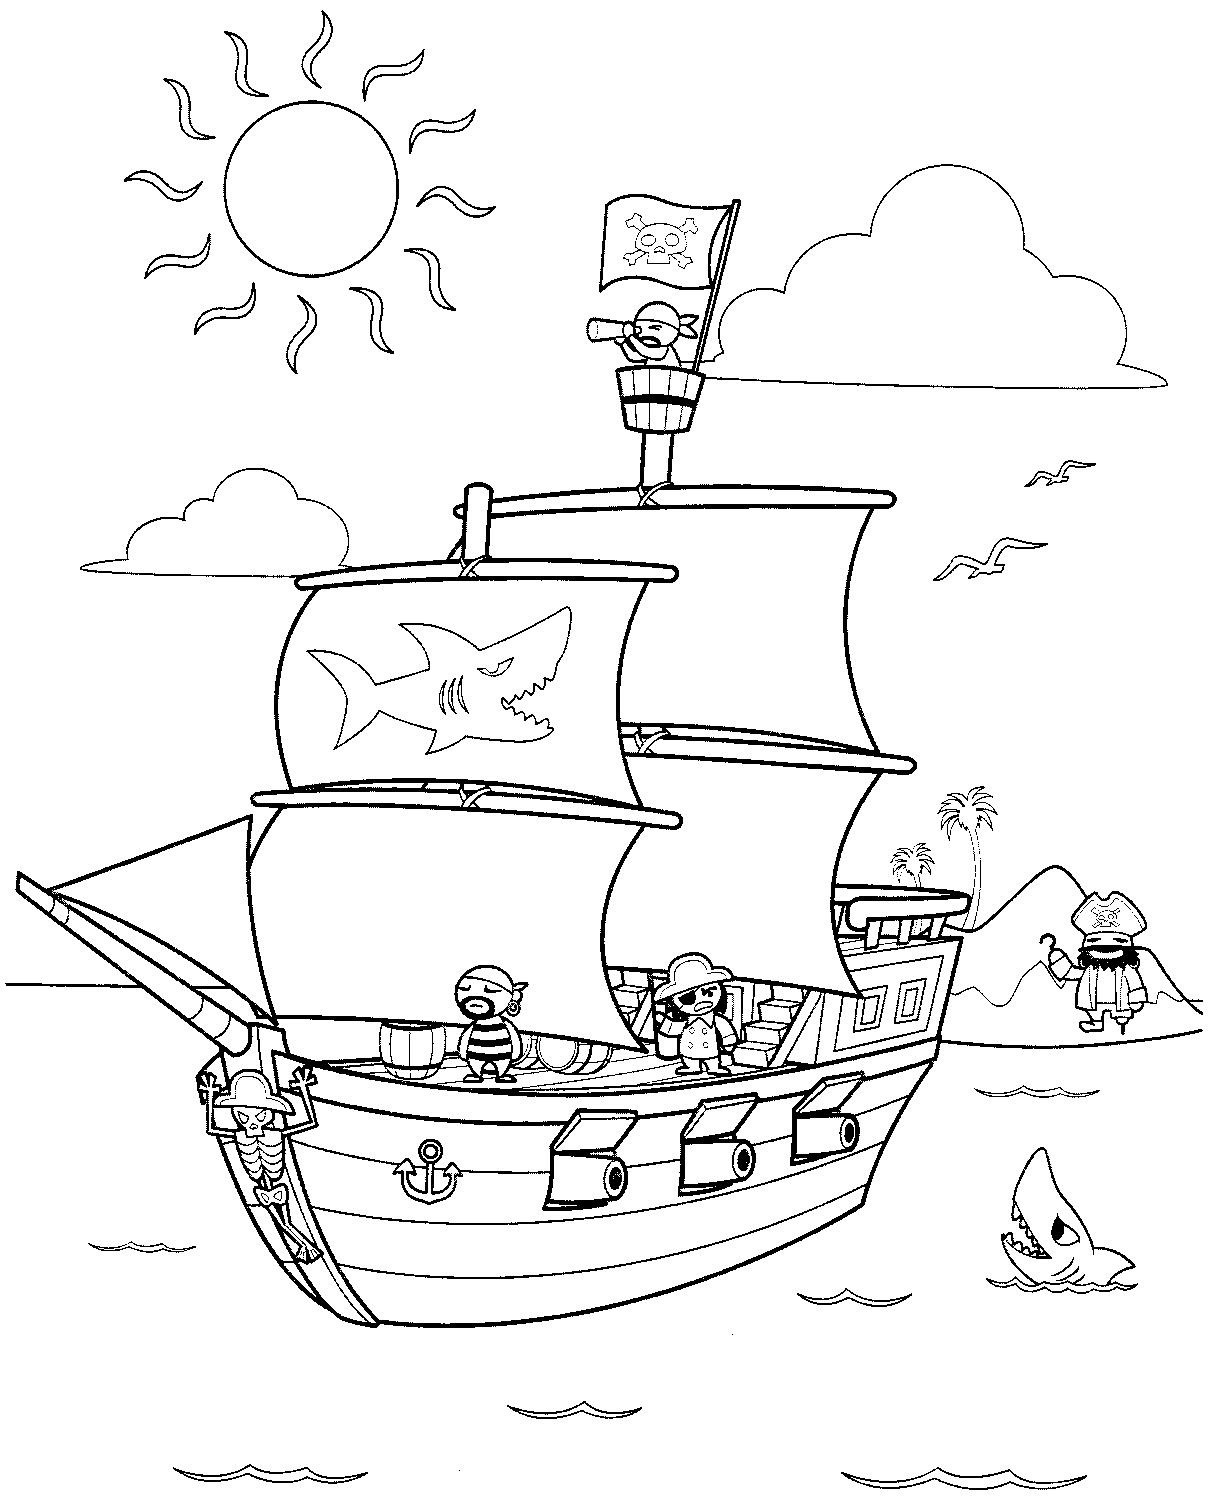 Pirate coloring pages to download and print for free